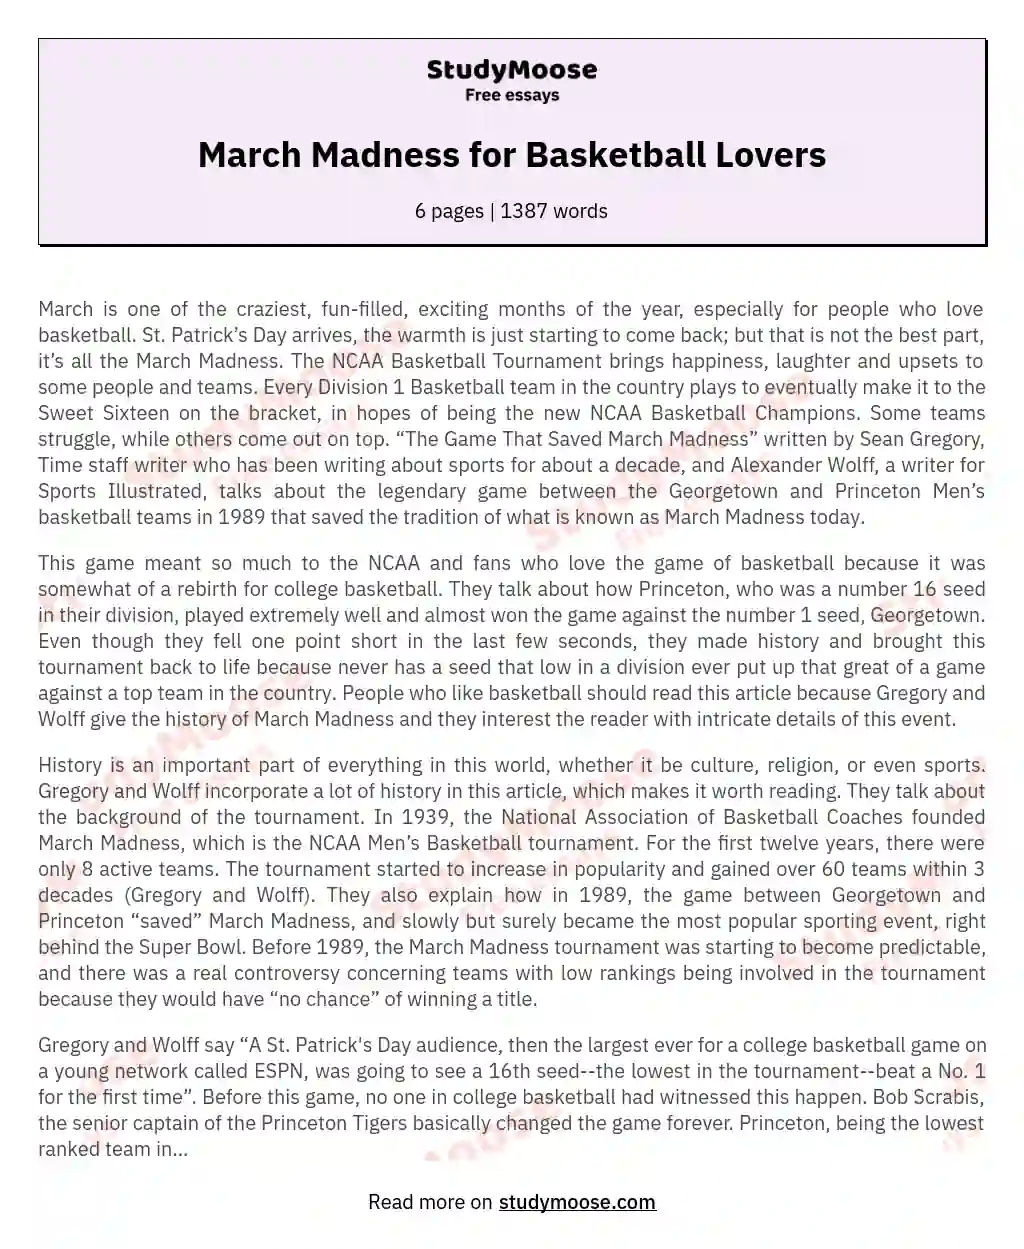 March Madness for Basketball Lovers